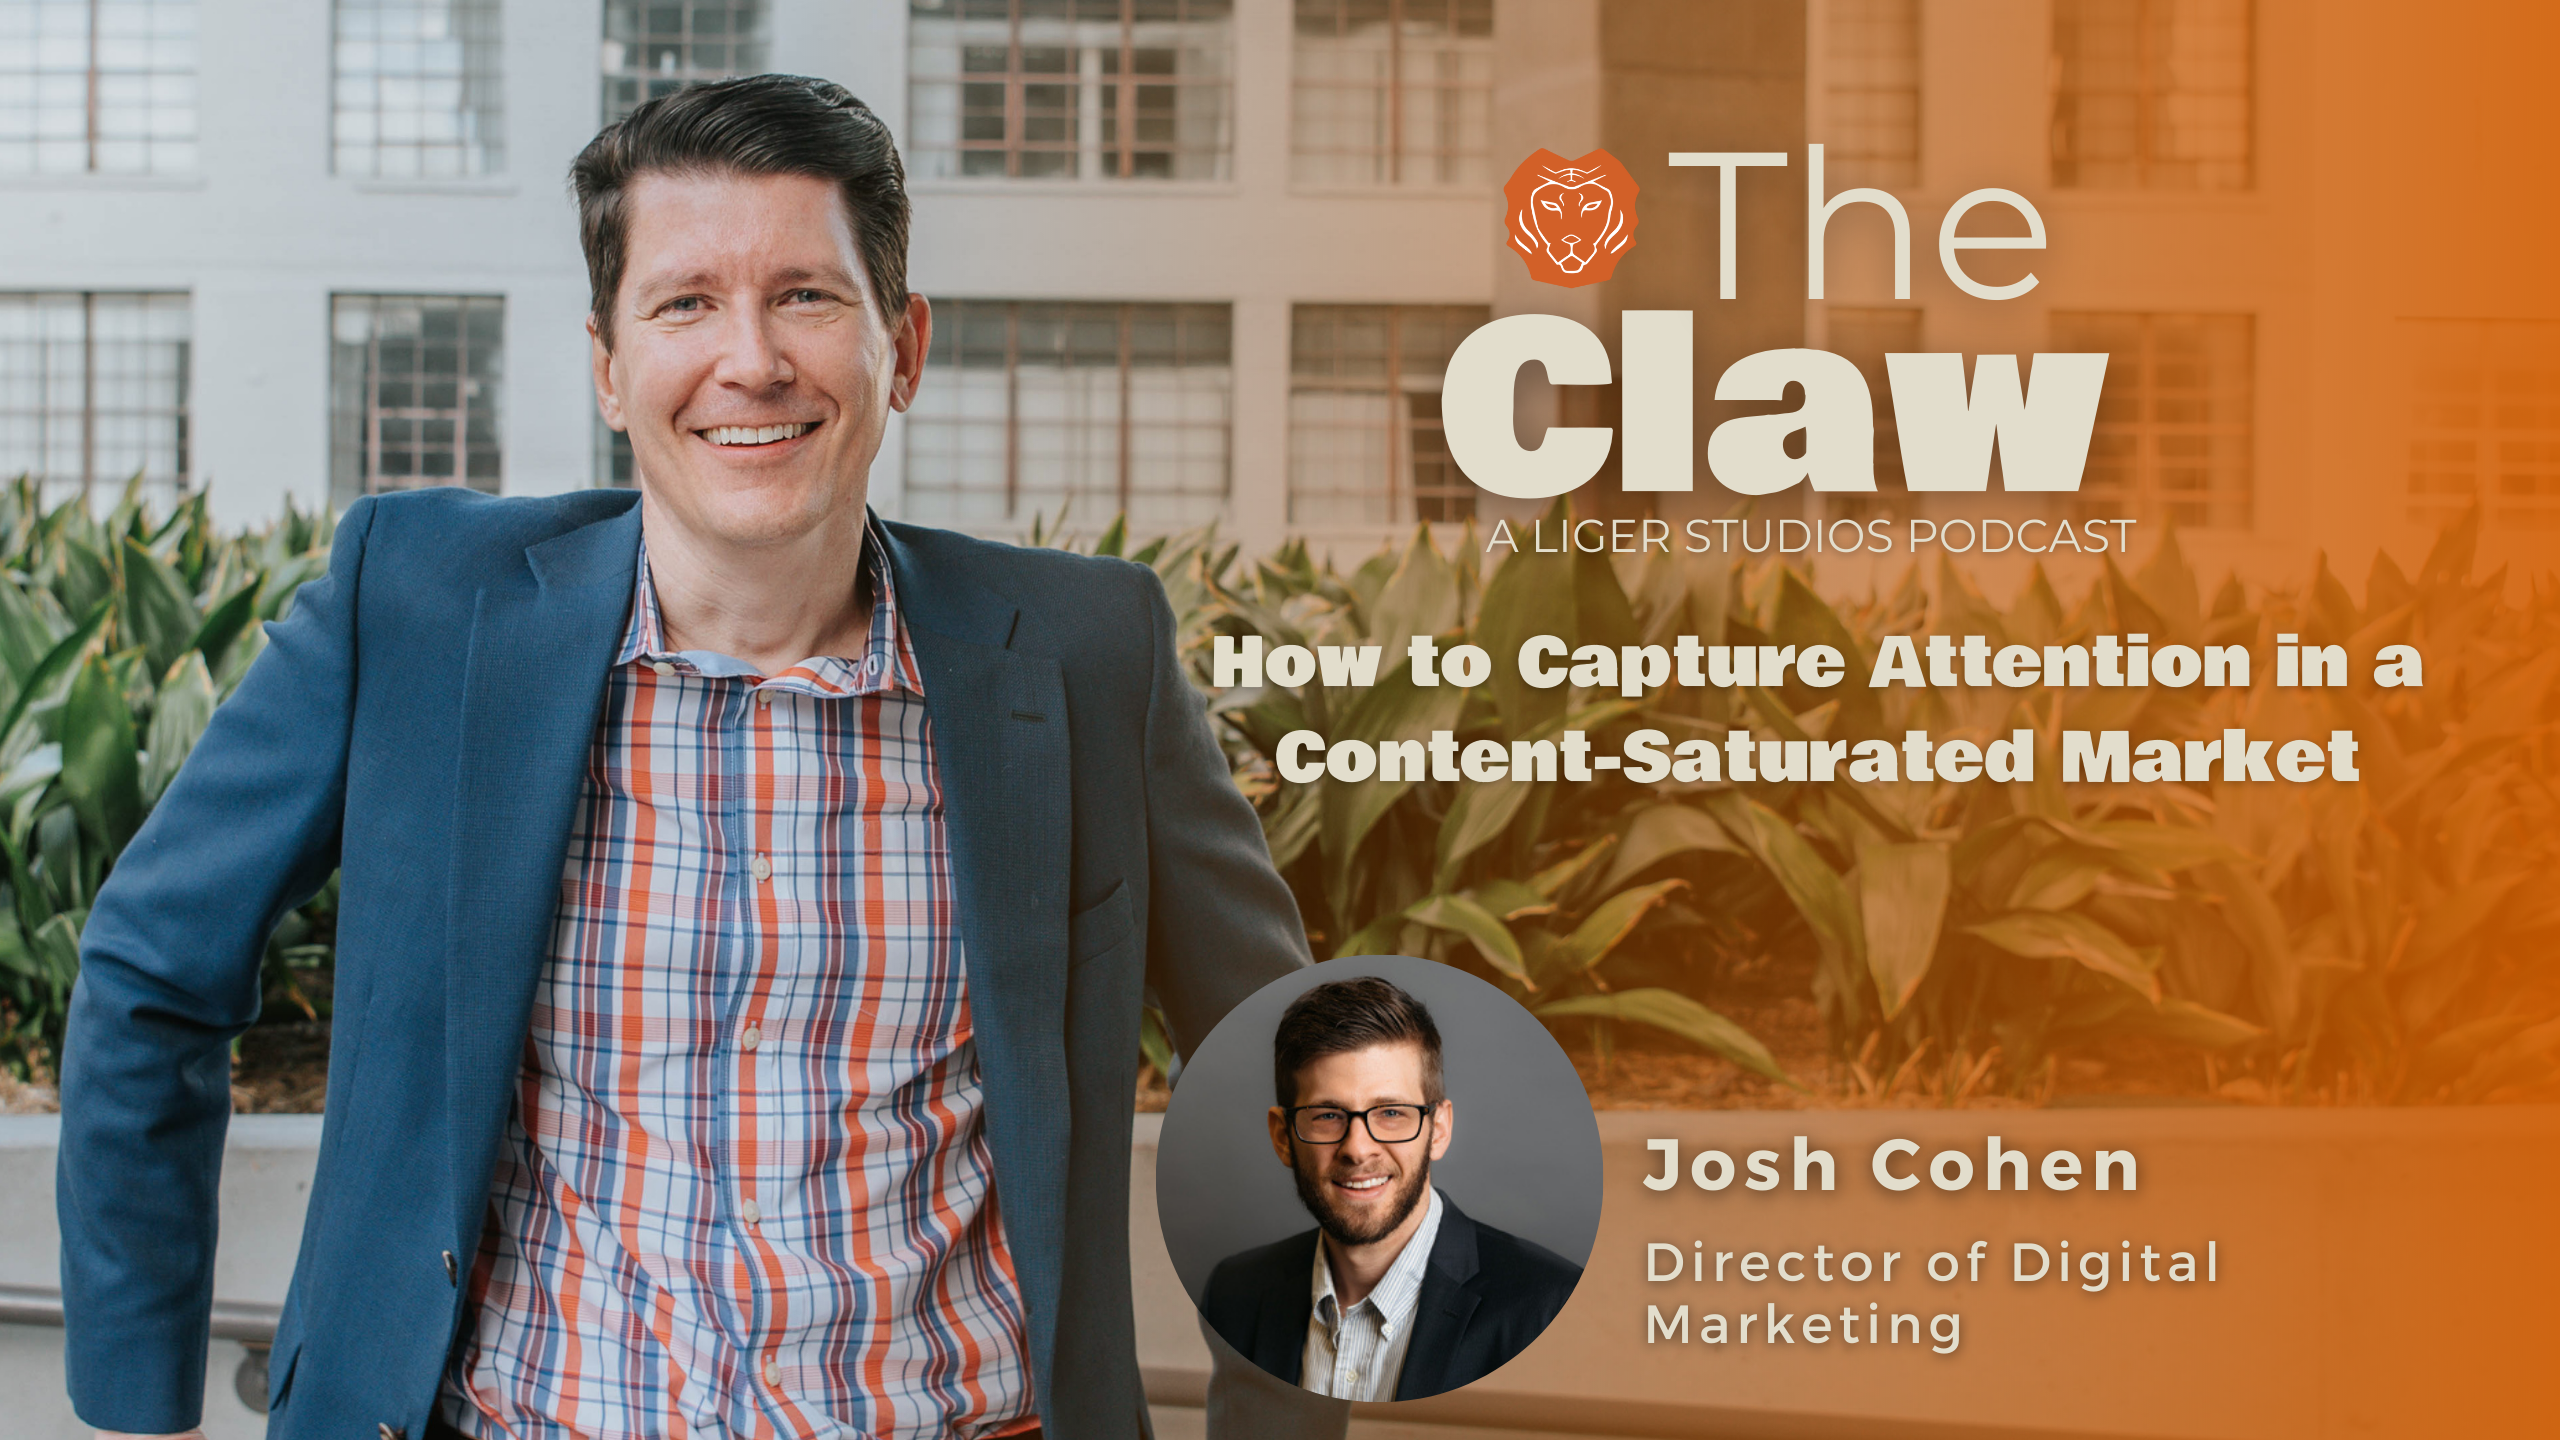 Paid Media Strategy 101: How to Capture Attention in a Content-Saturated Market with Josh Cohen